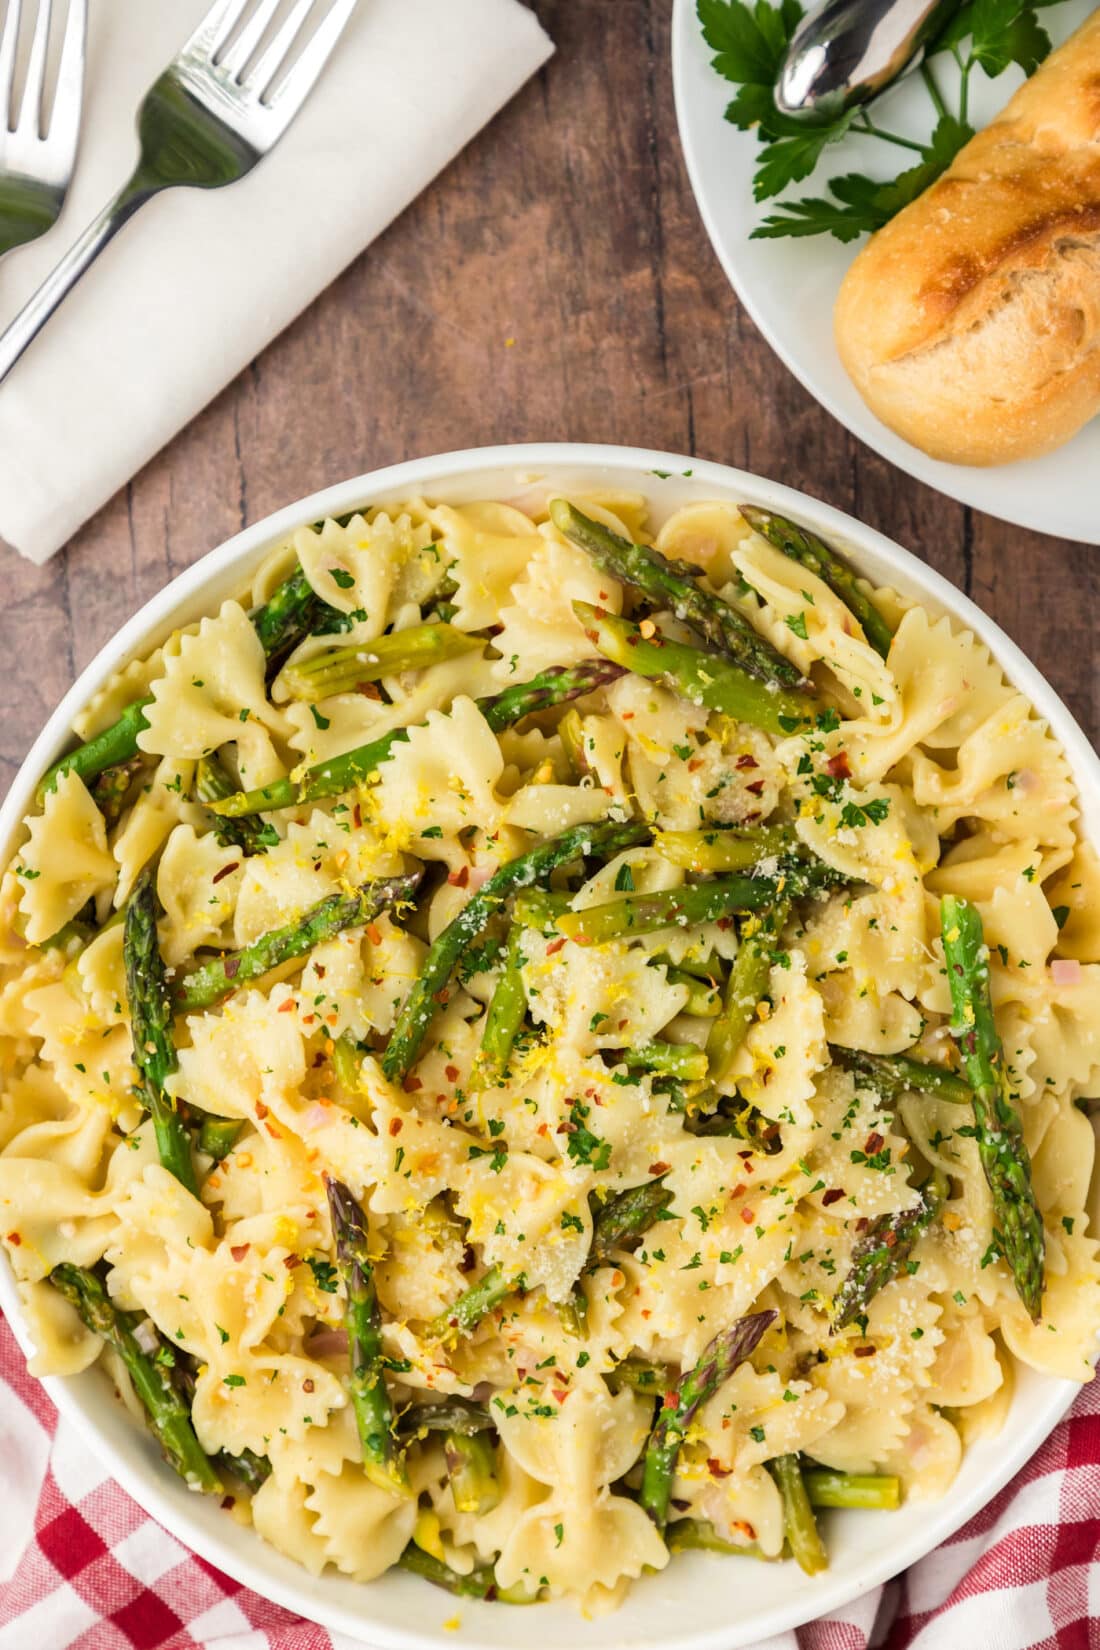 Bowl of Asparagus Pasta with bread on the side